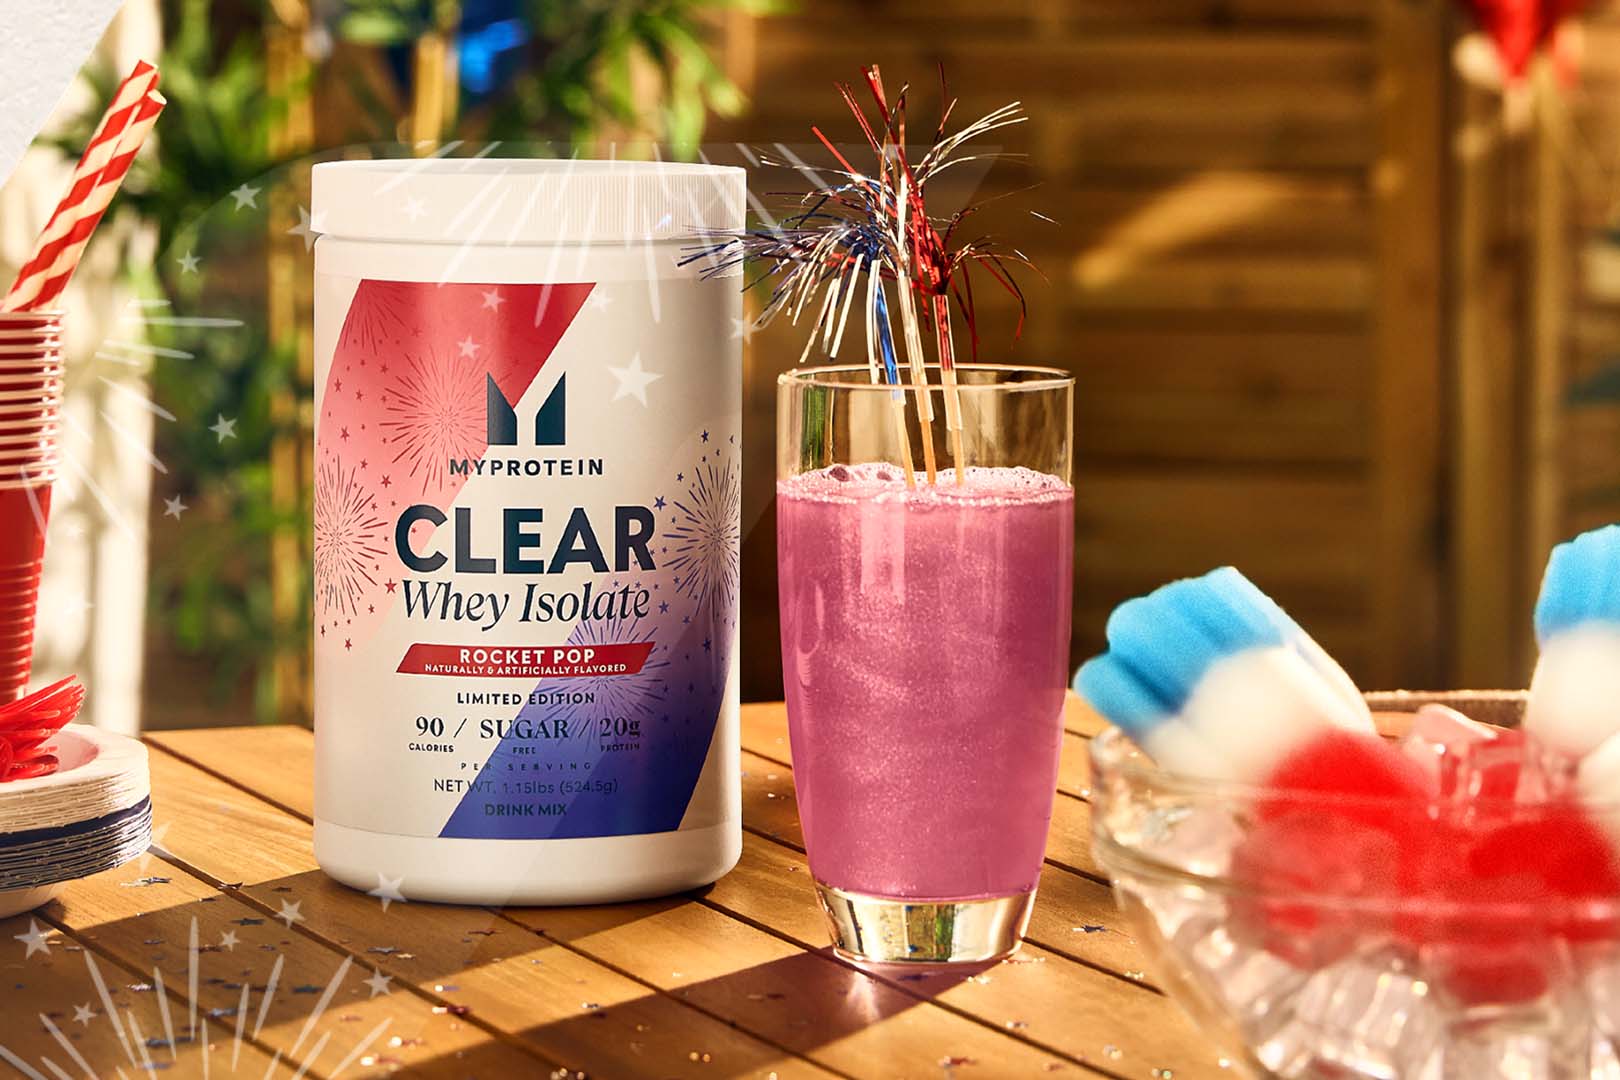 Myprotein Brings Back Rocket Pop Clear Whey Isolate